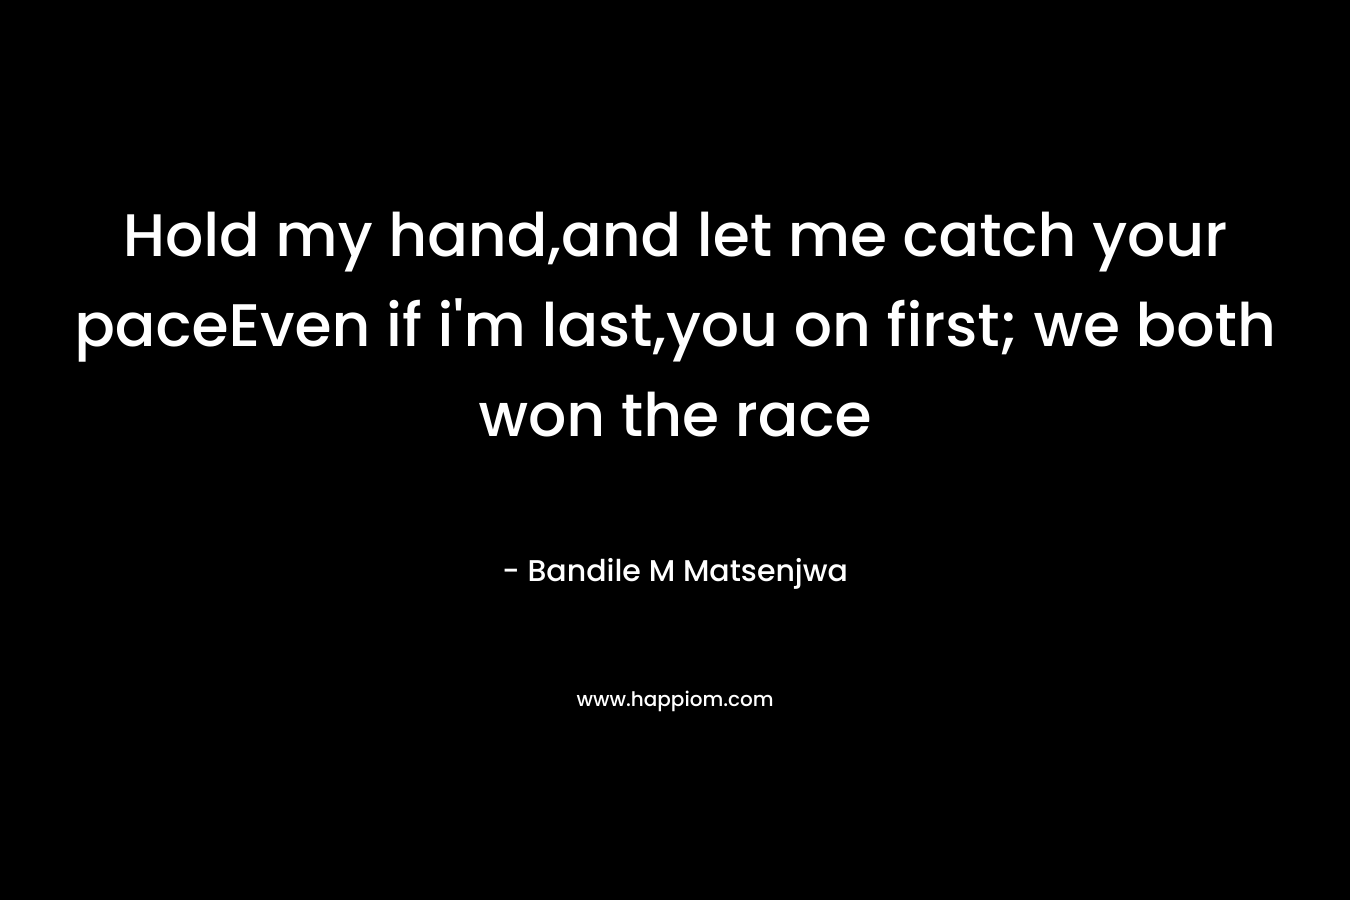 Hold my hand,and let me catch your paceEven if i’m last,you on first; we both won the race – Bandile M Matsenjwa